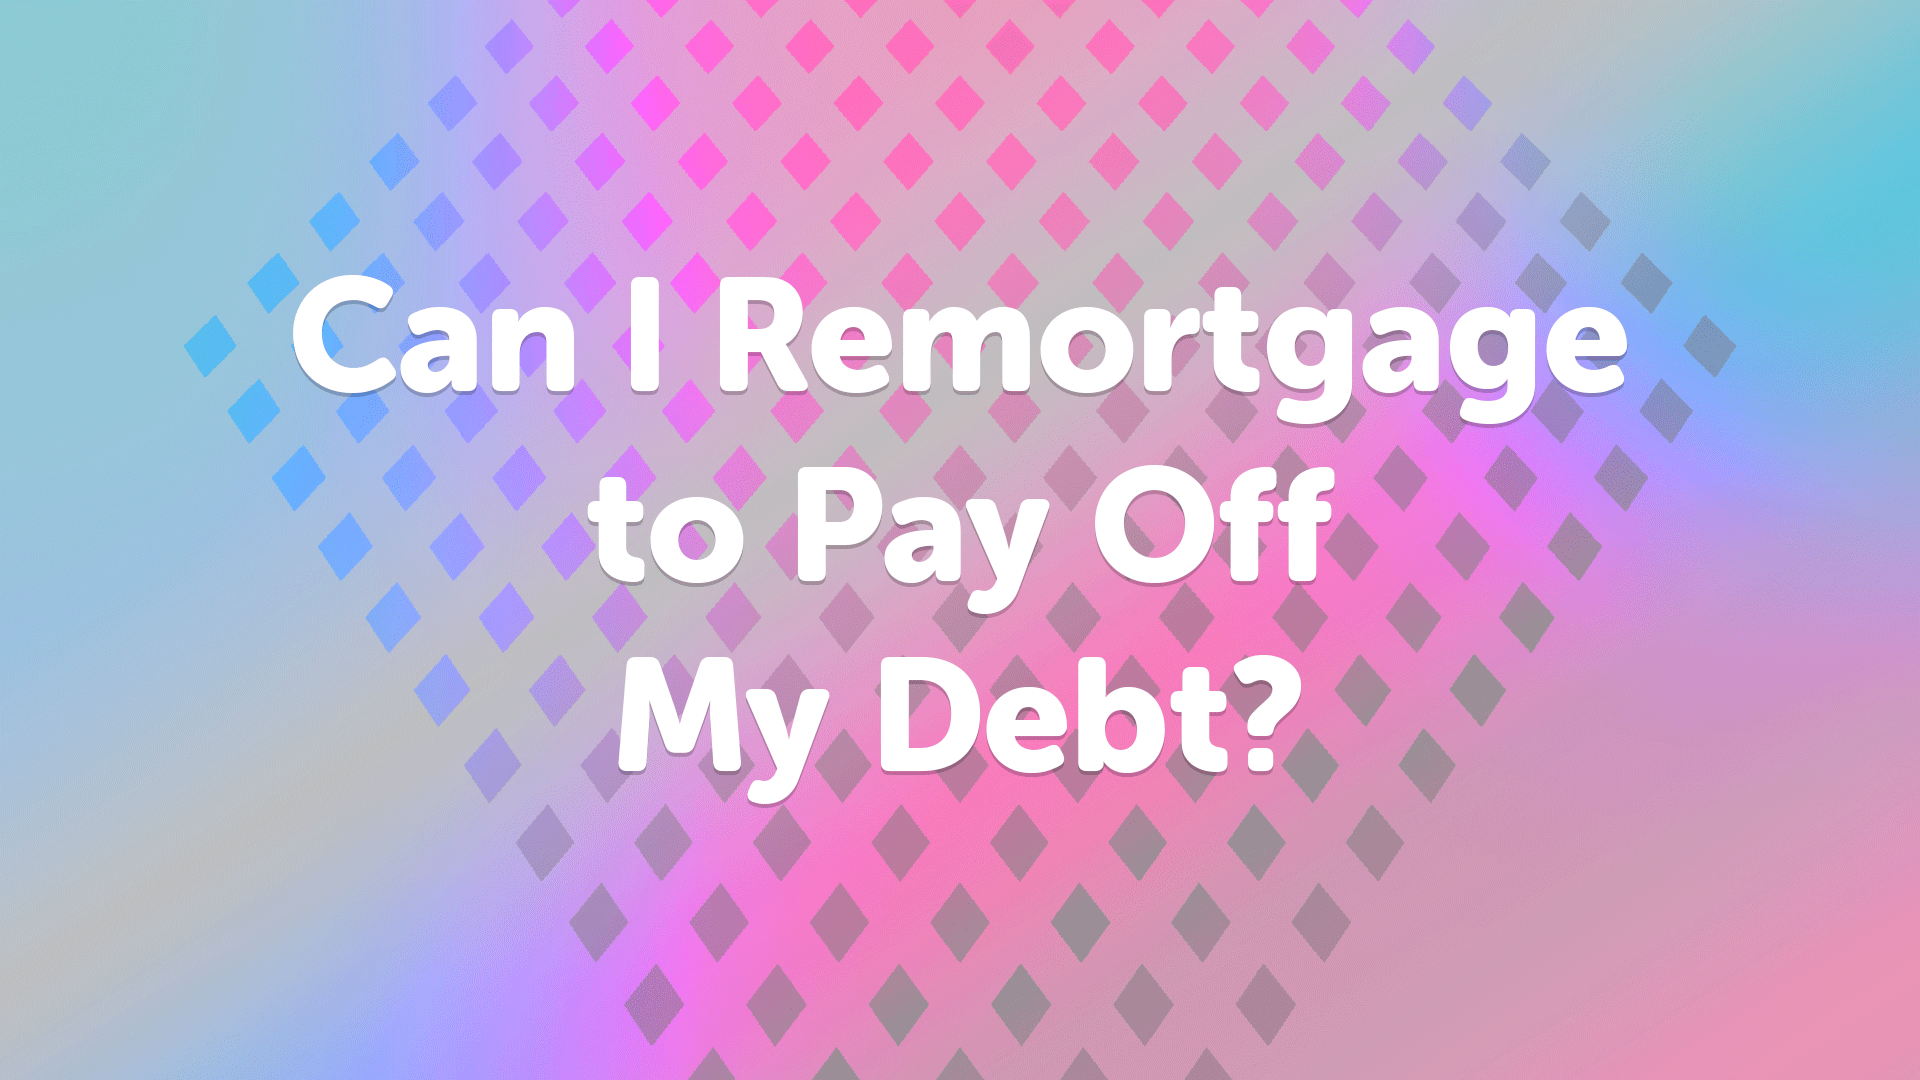 Remortgage to Pay Off Debt Manchester